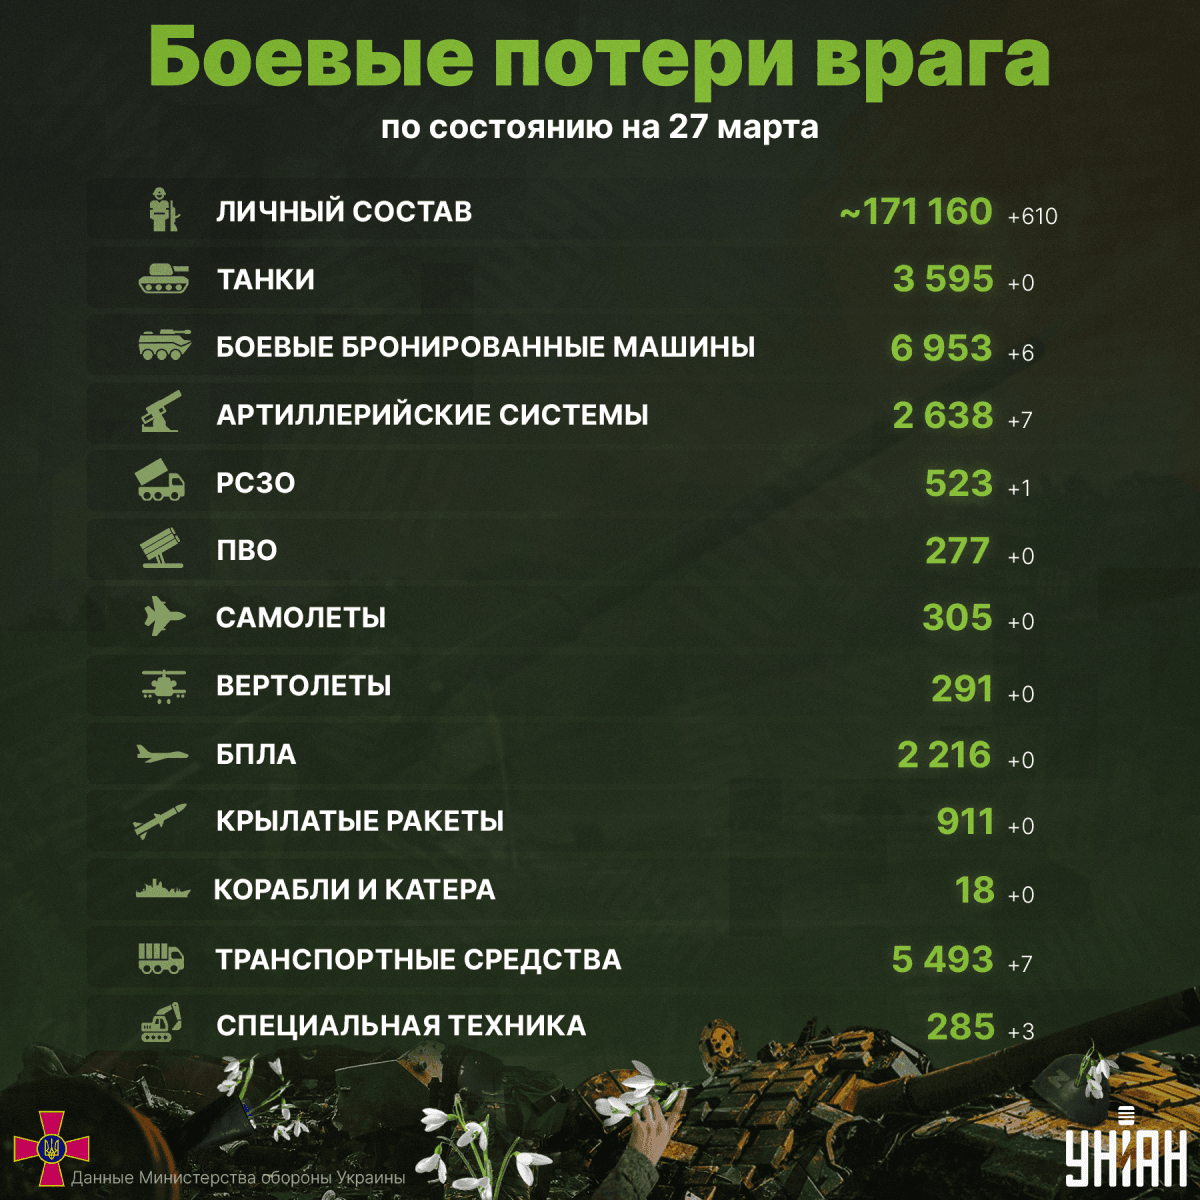 Russia's losses in Ukraine as of March 27 / photo from UNIAN